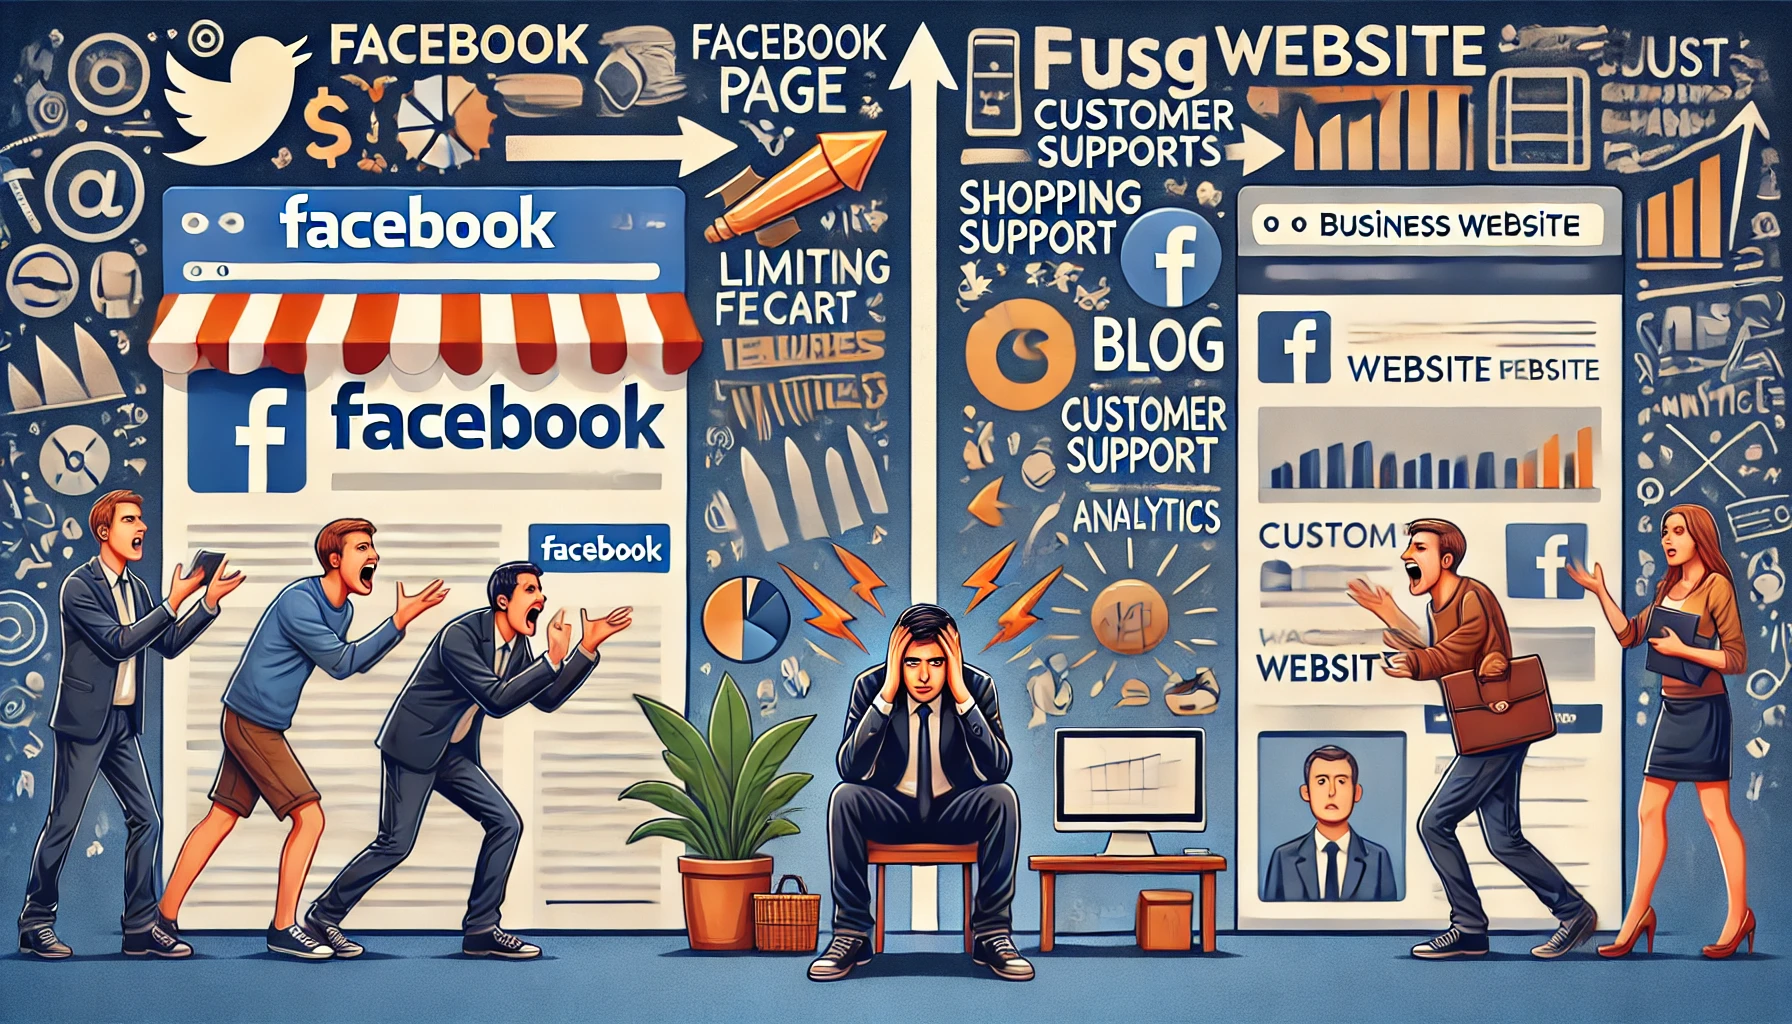 image 8 Reasons Why a Facebook Page Isn’t Enough For Business